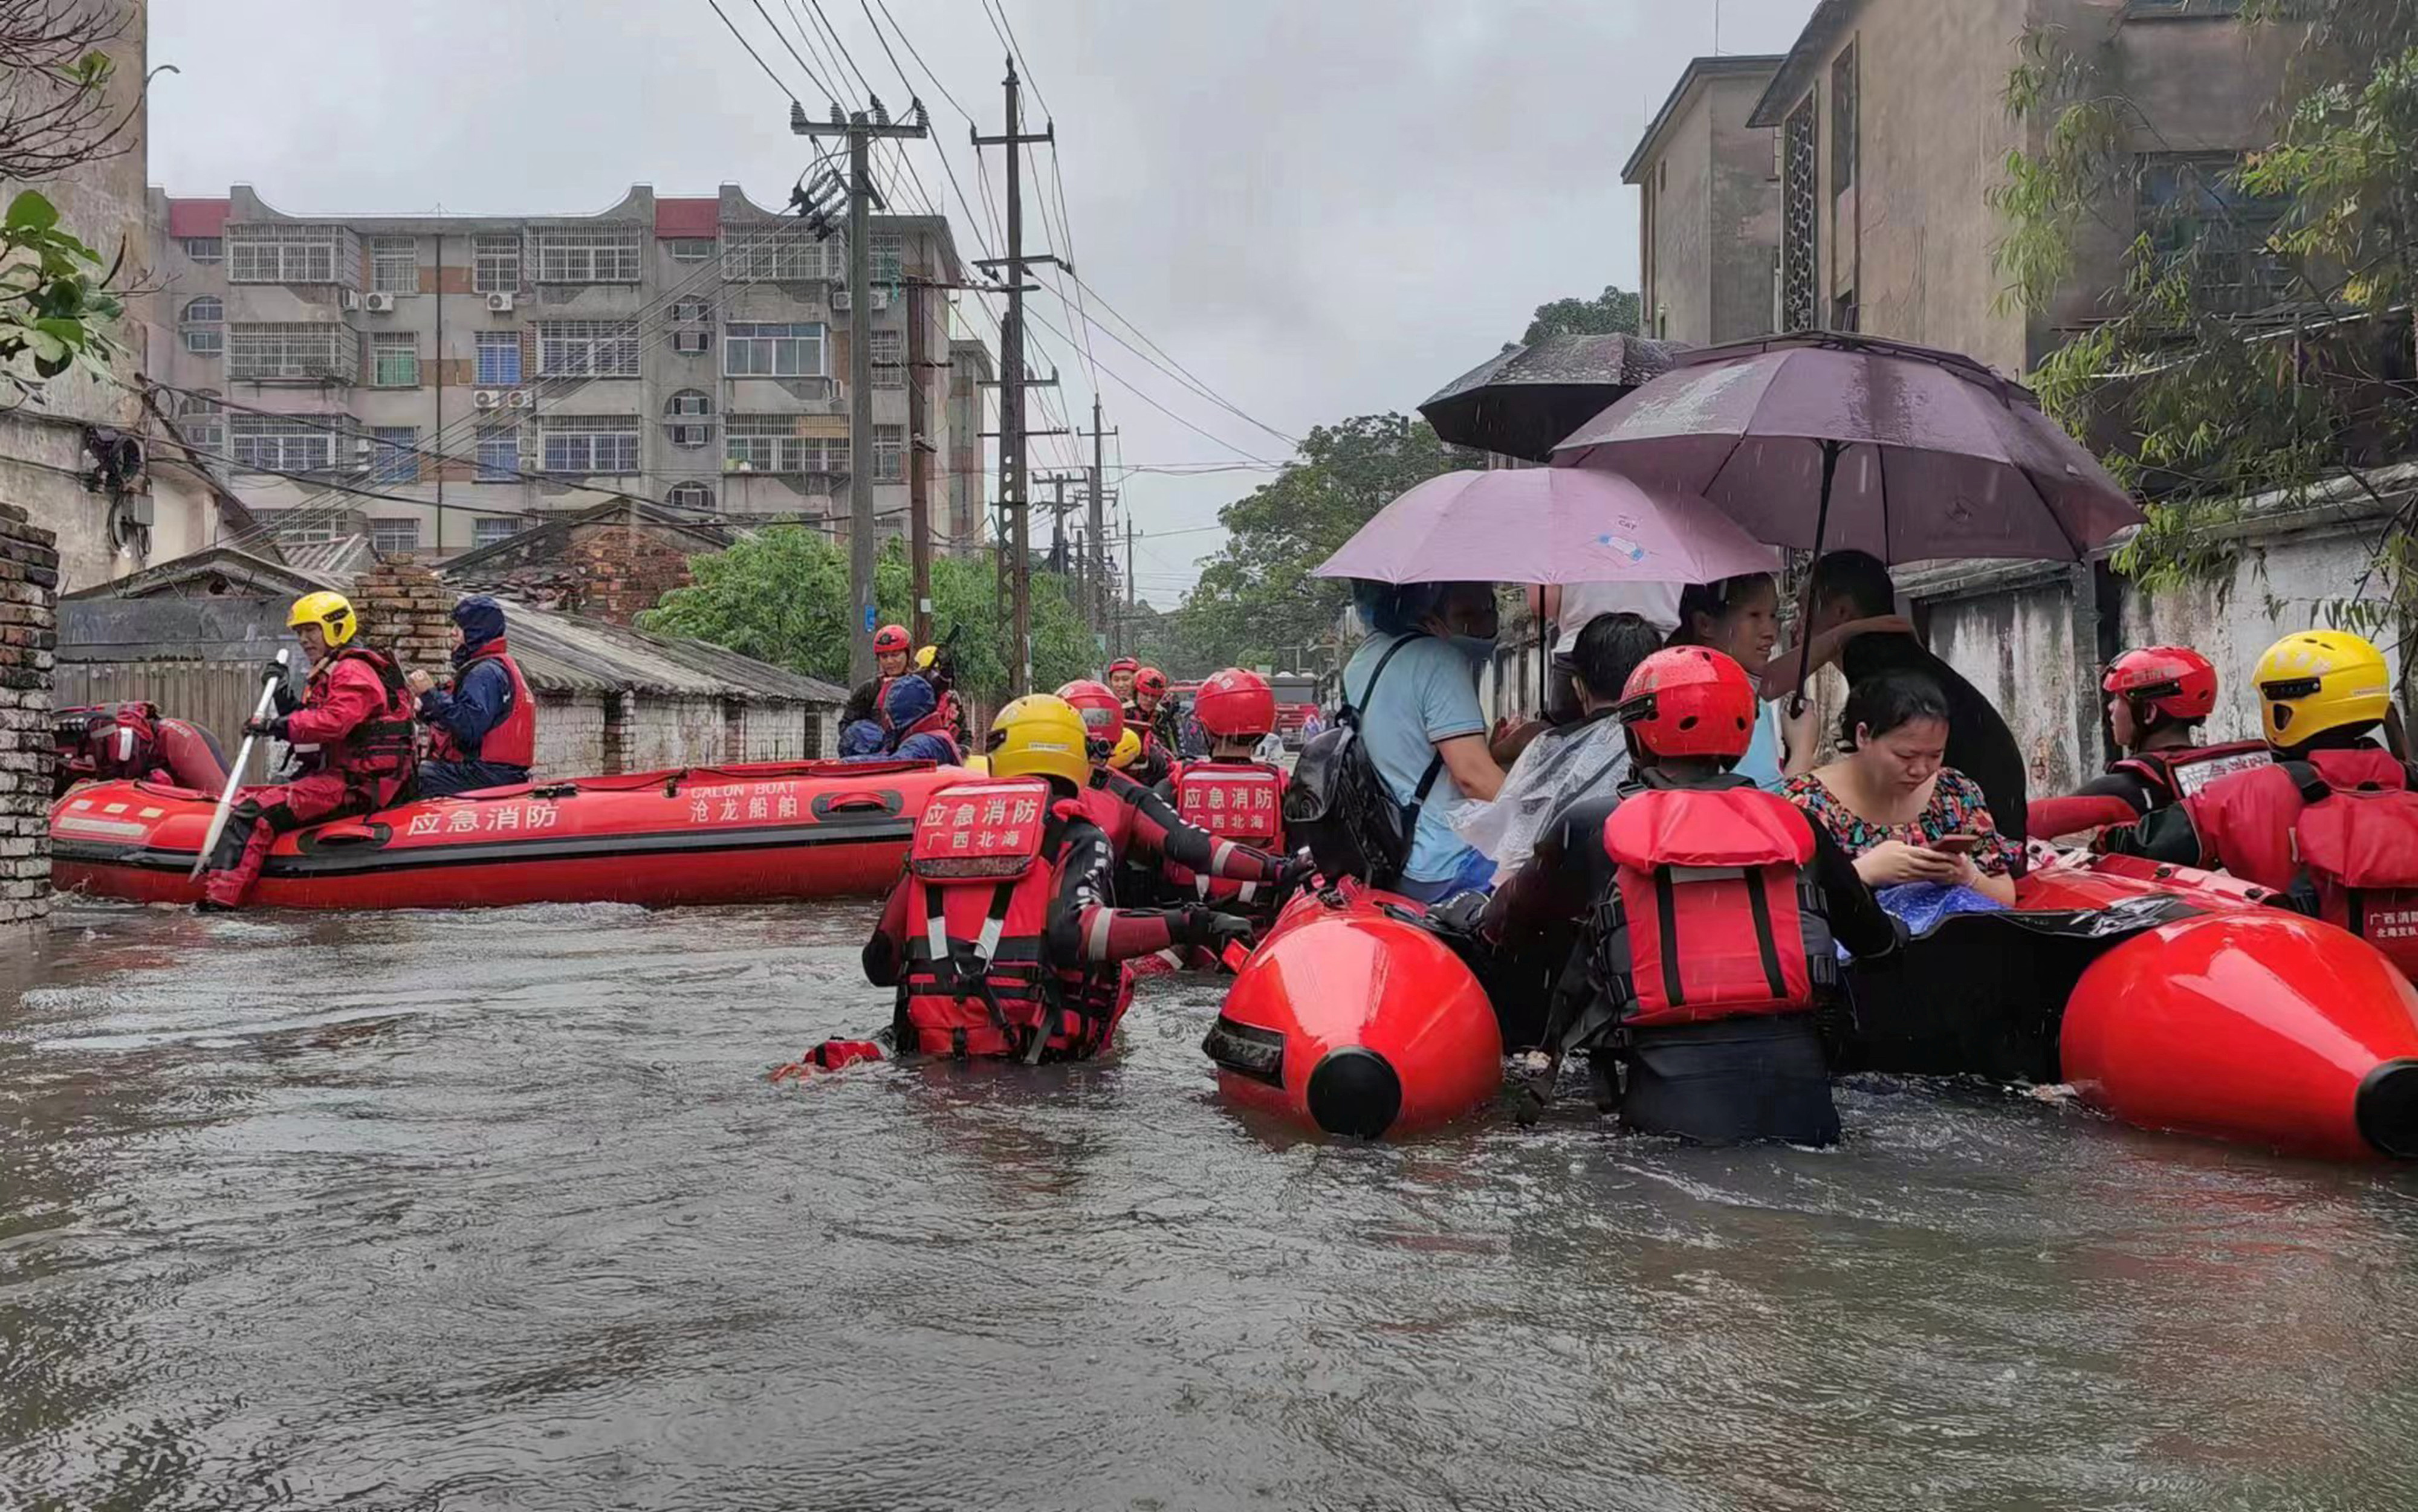 Rescue workers evacuate stranded residents on a flooded street following heavy rainfall in Beihai